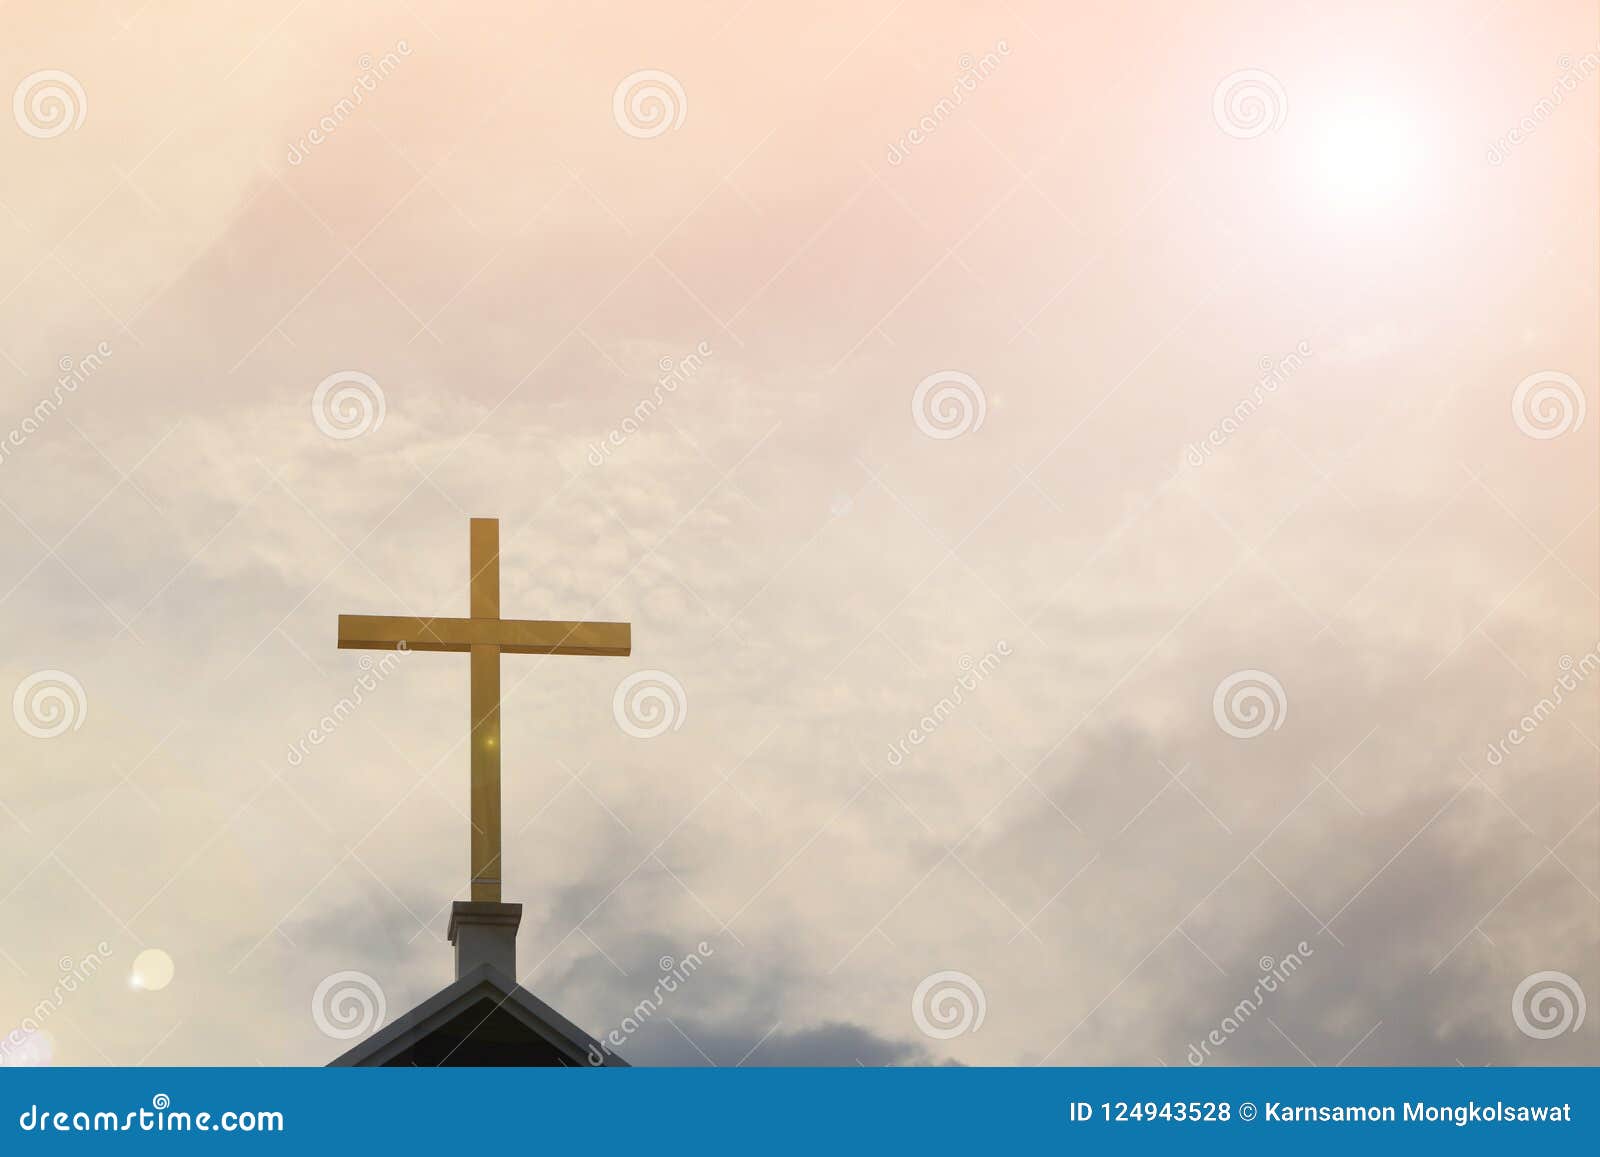 Golden Holy Cross on Chapel Roof with Spiritual Sky Background ...